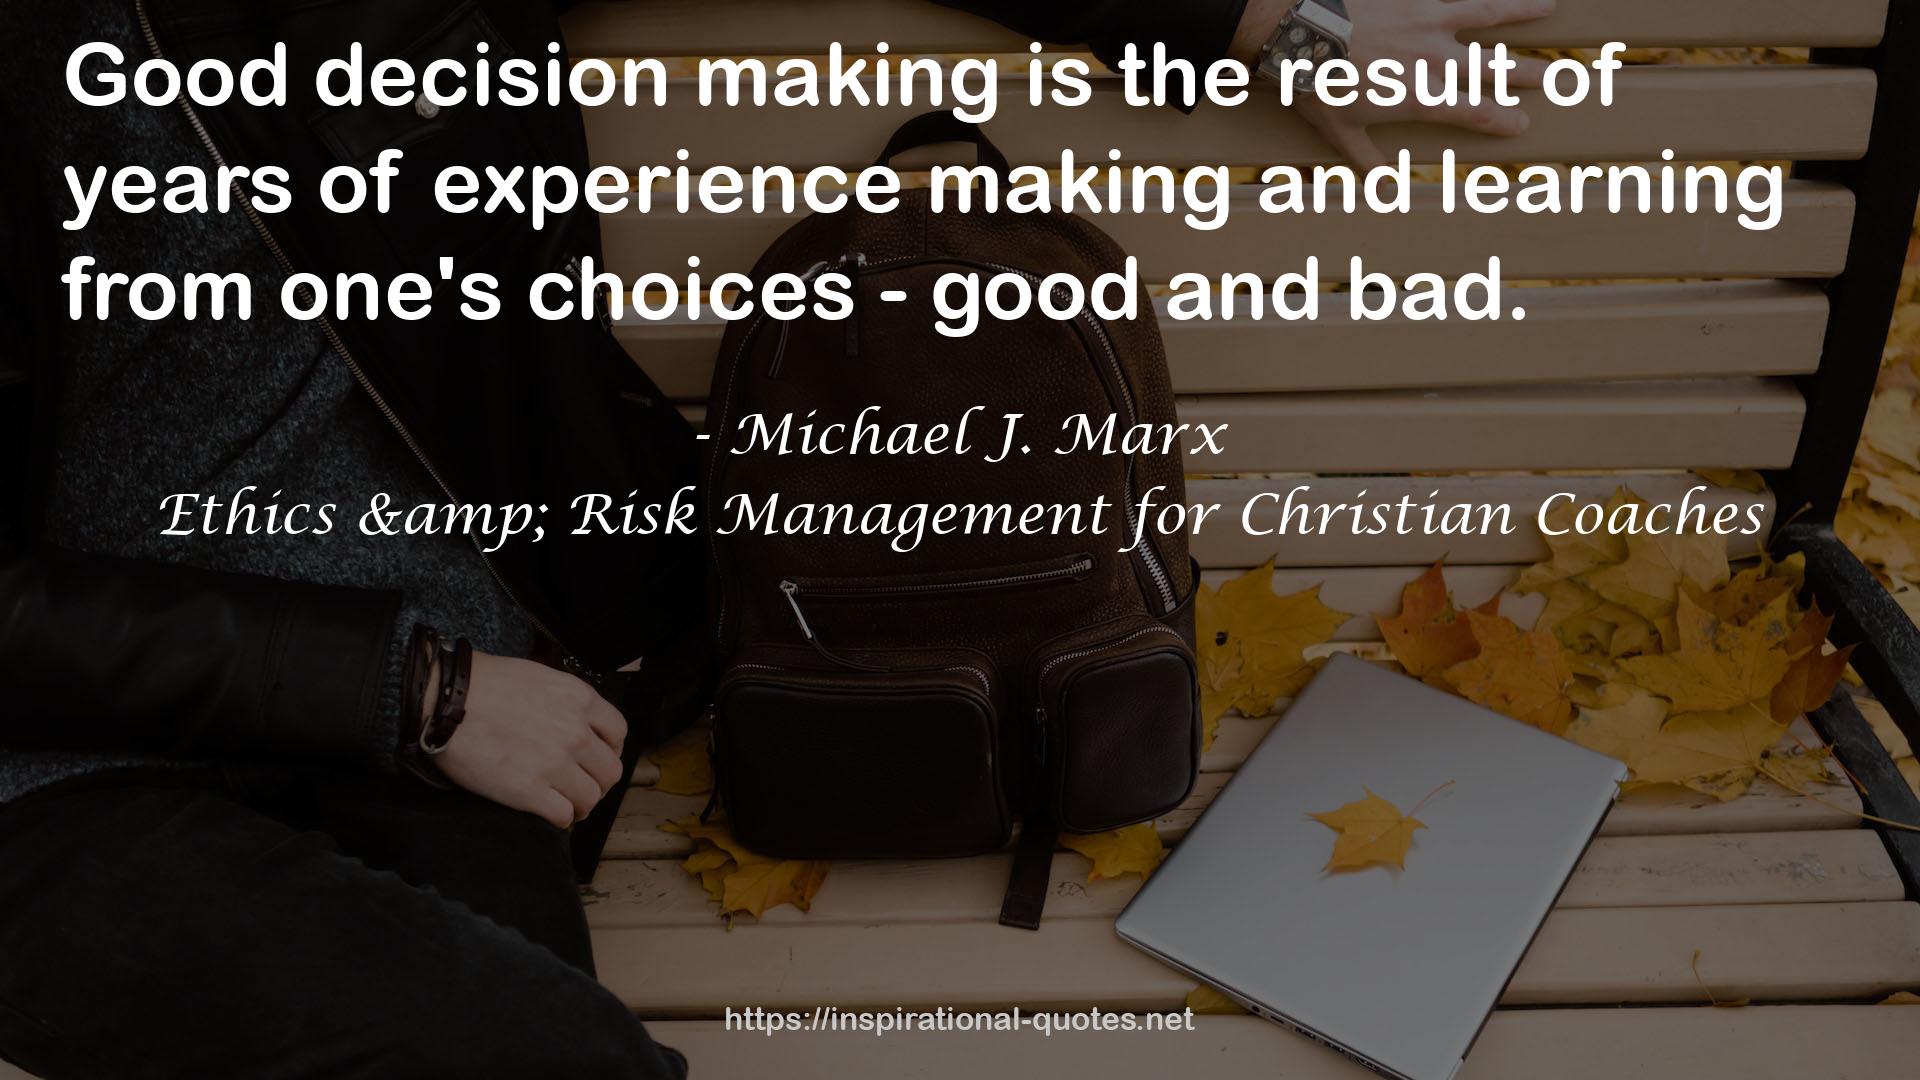 Ethics & Risk Management for Christian Coaches QUOTES